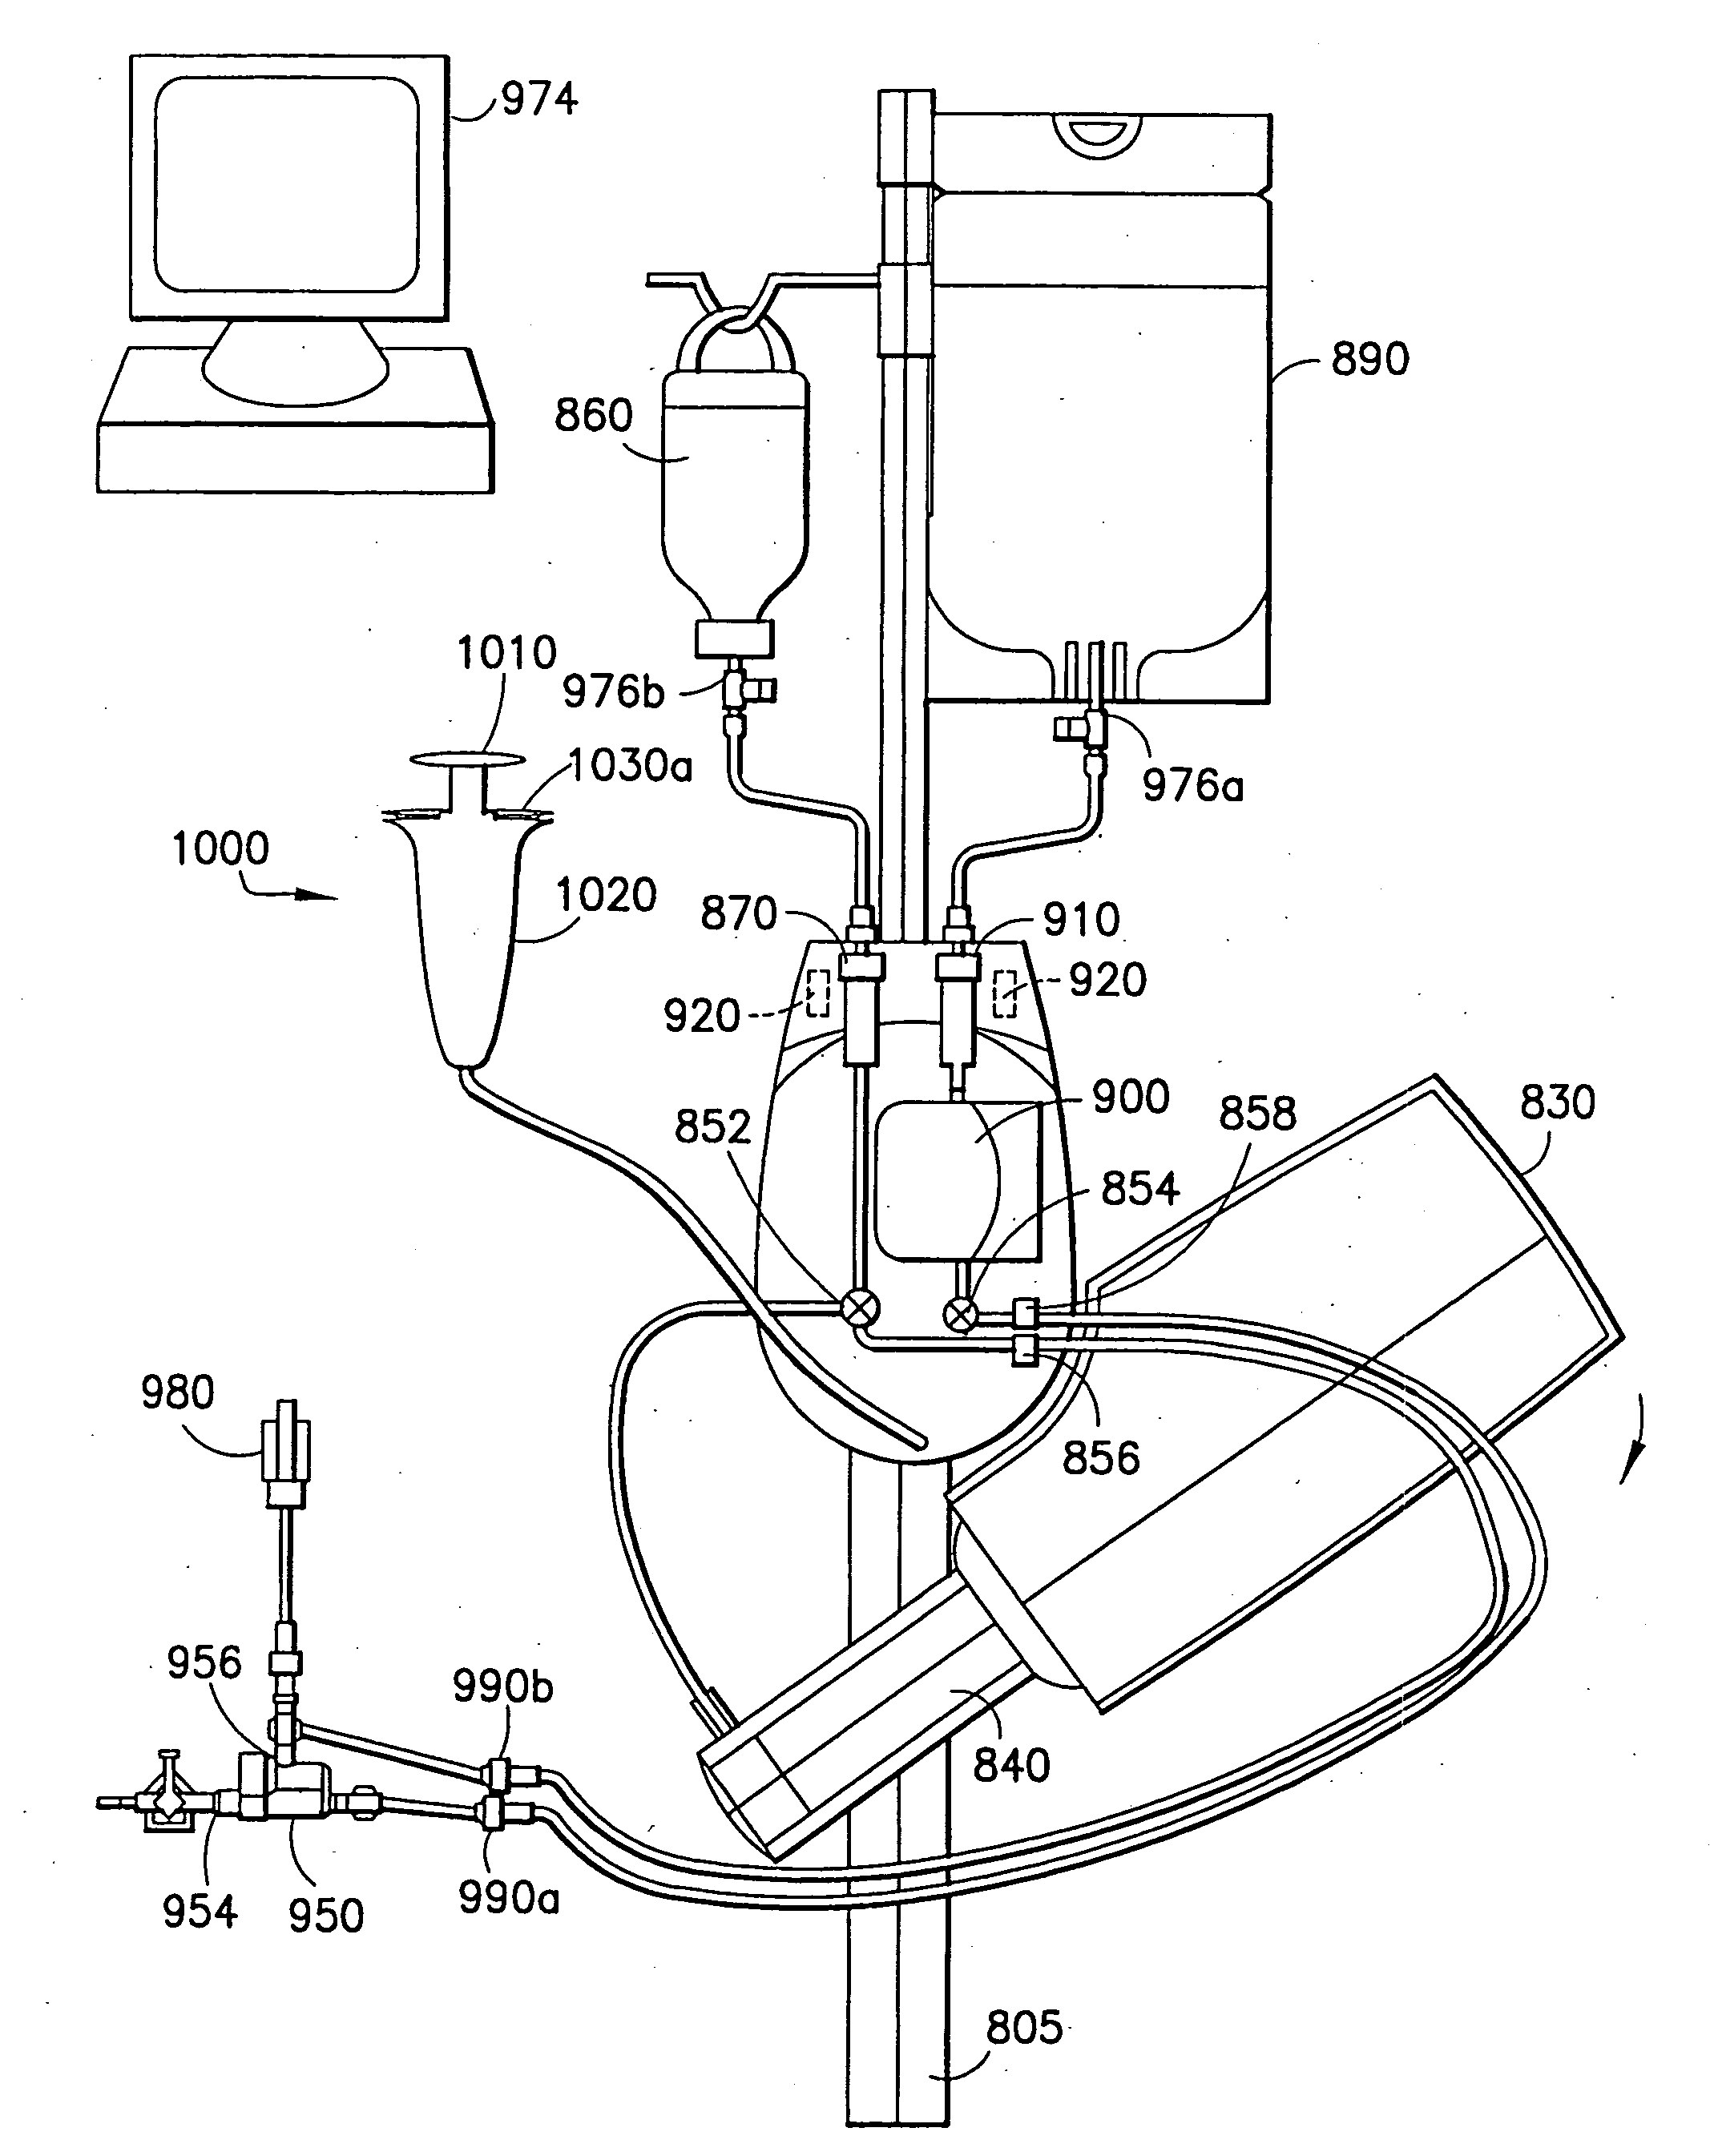 Fluid delivery system including a fluid path set with sterile check valve connector